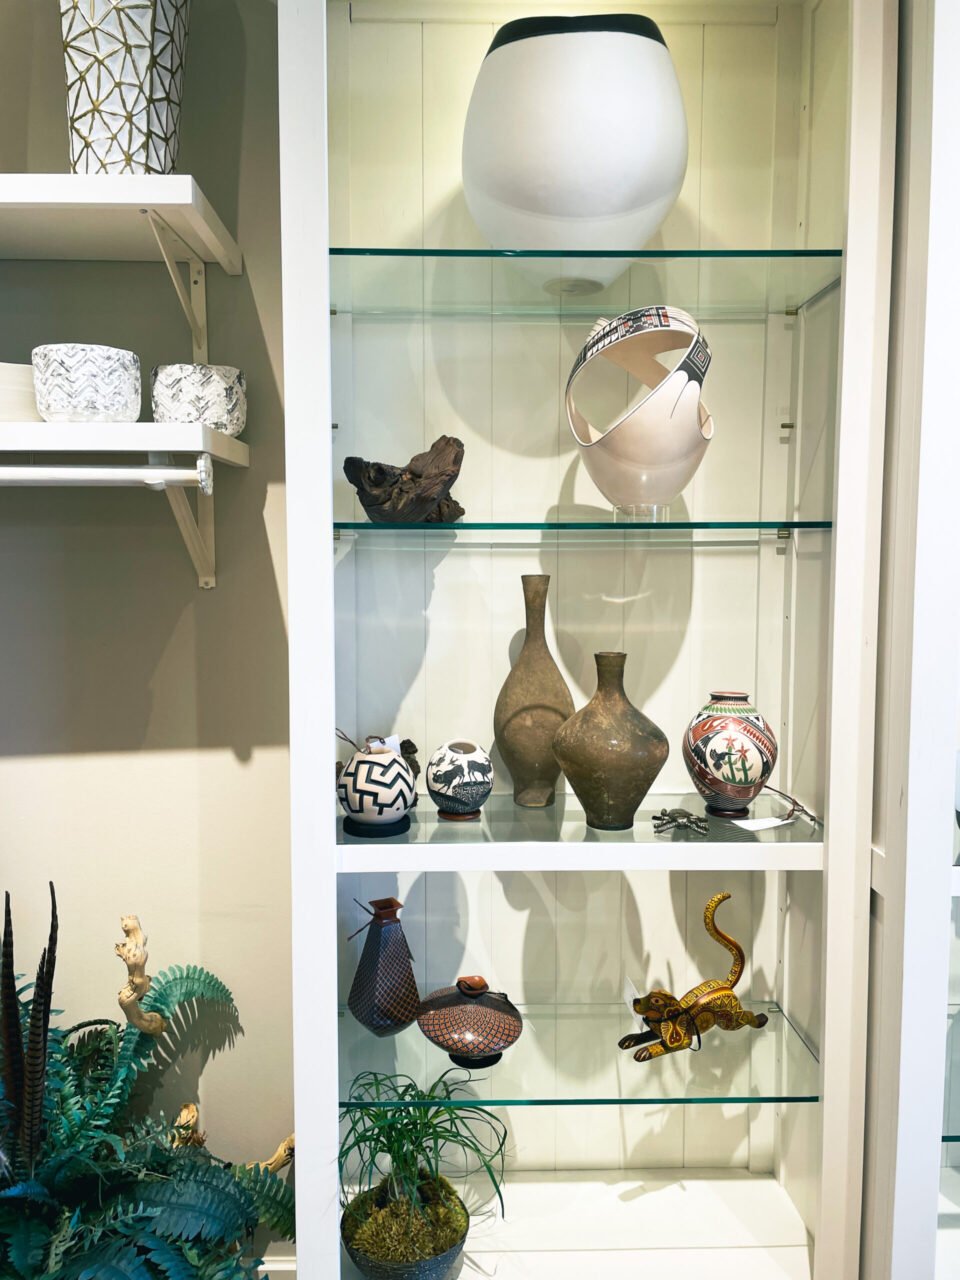 A display case with many vases and plants on it.